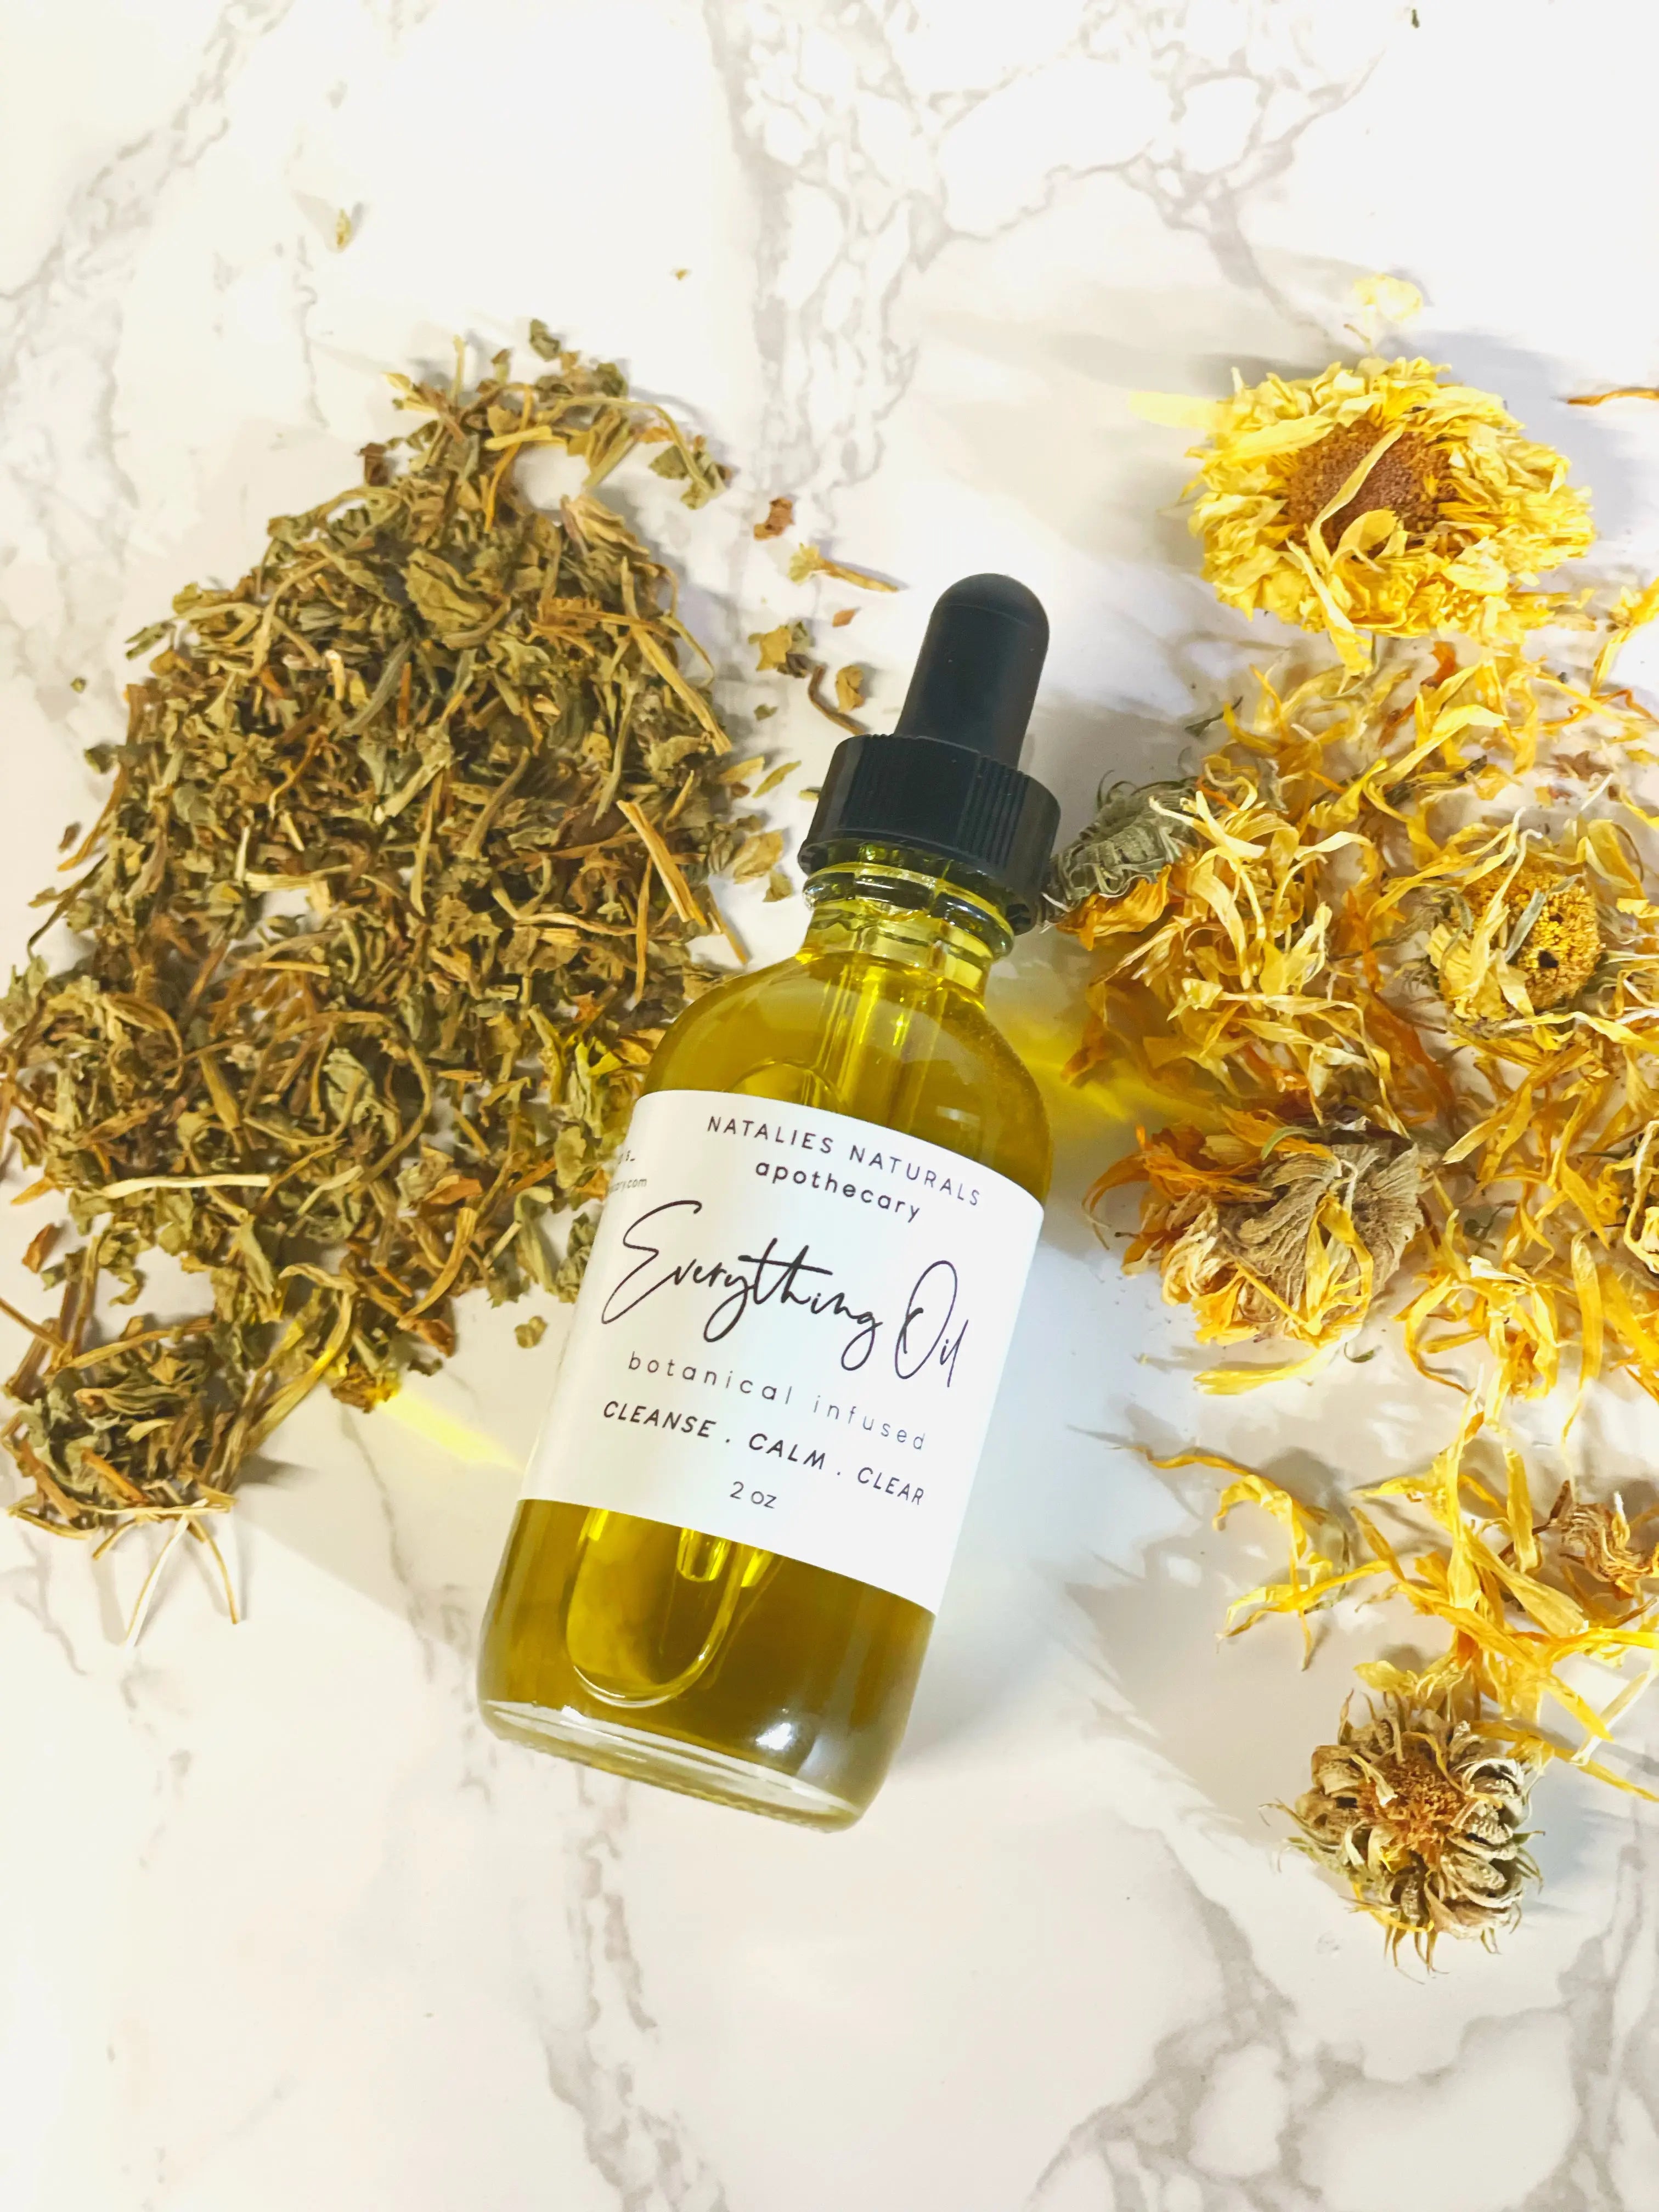 Everything Oil Natalies Naturals Apothecary